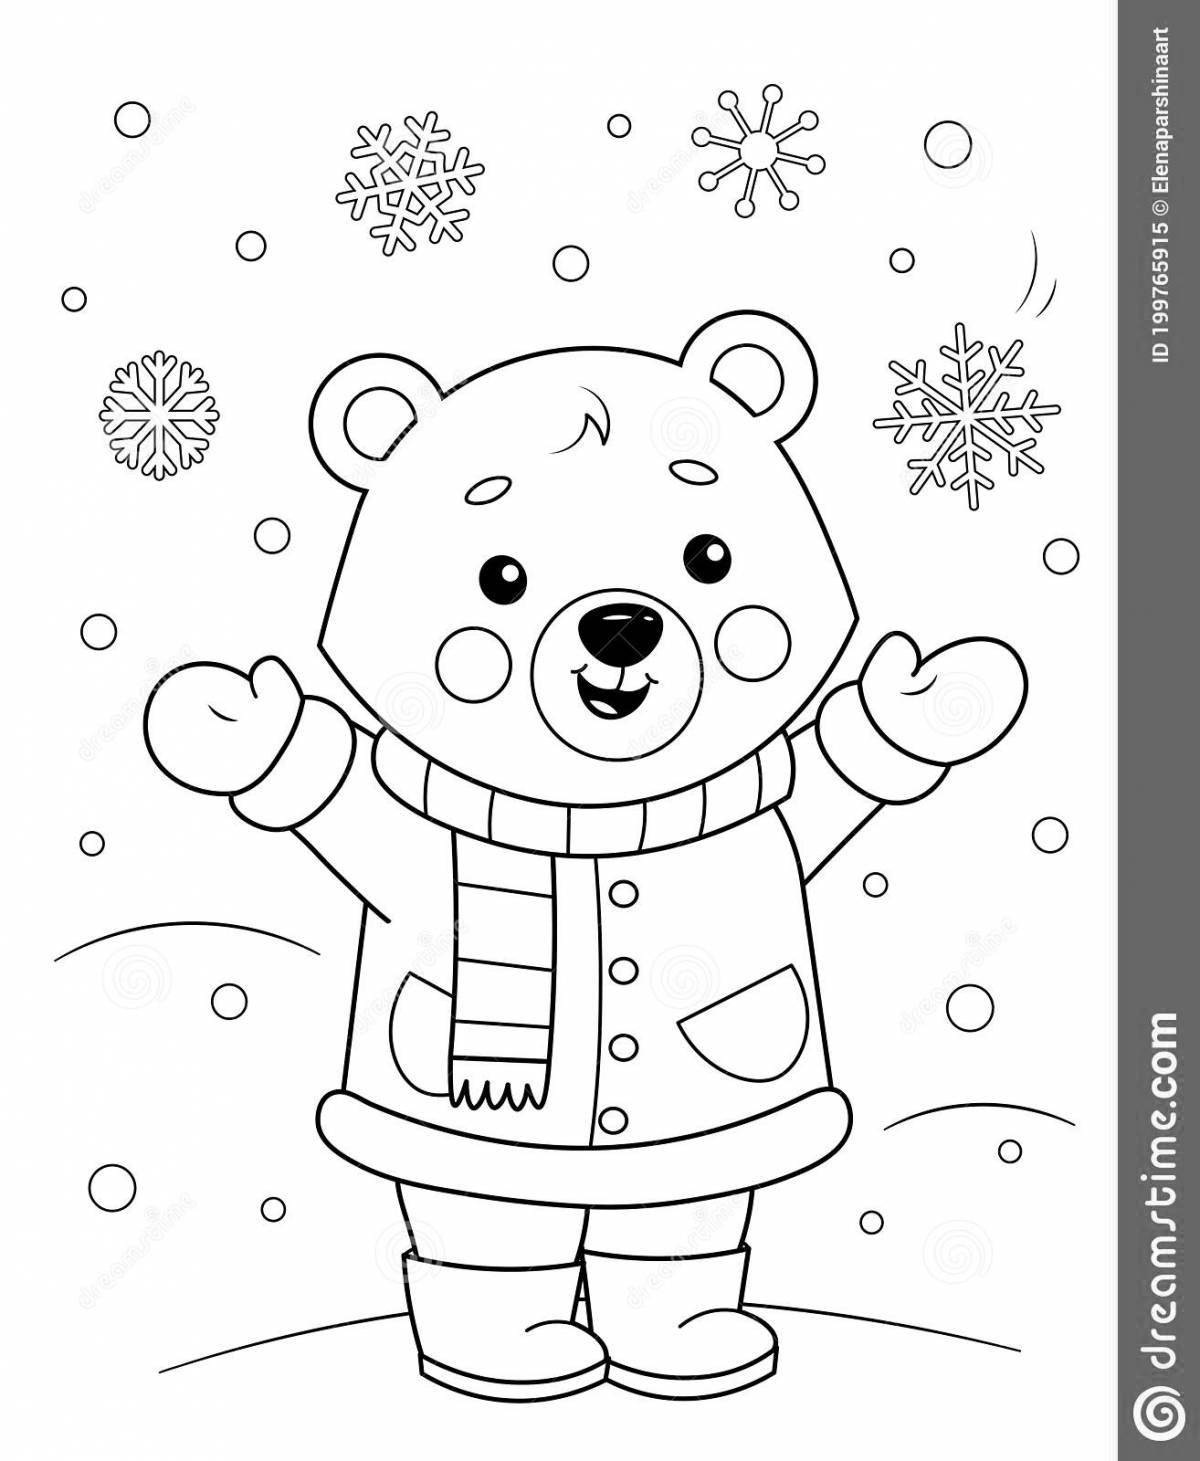 Bright bear with clothes